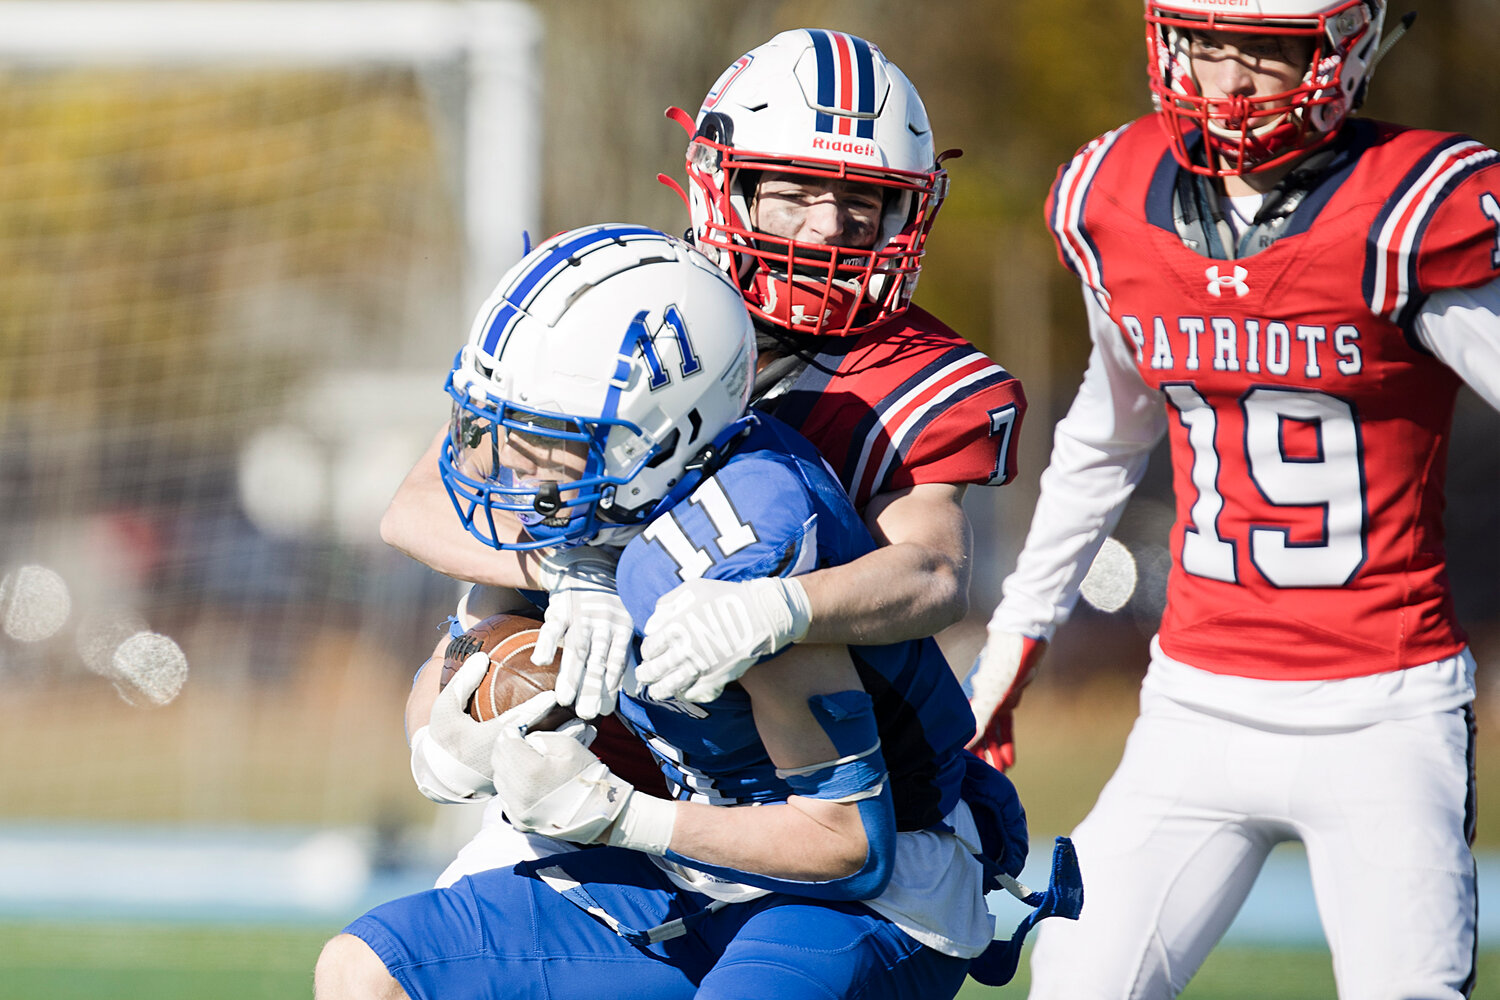 Christopher Wilkie wraps up a Middletown running back.